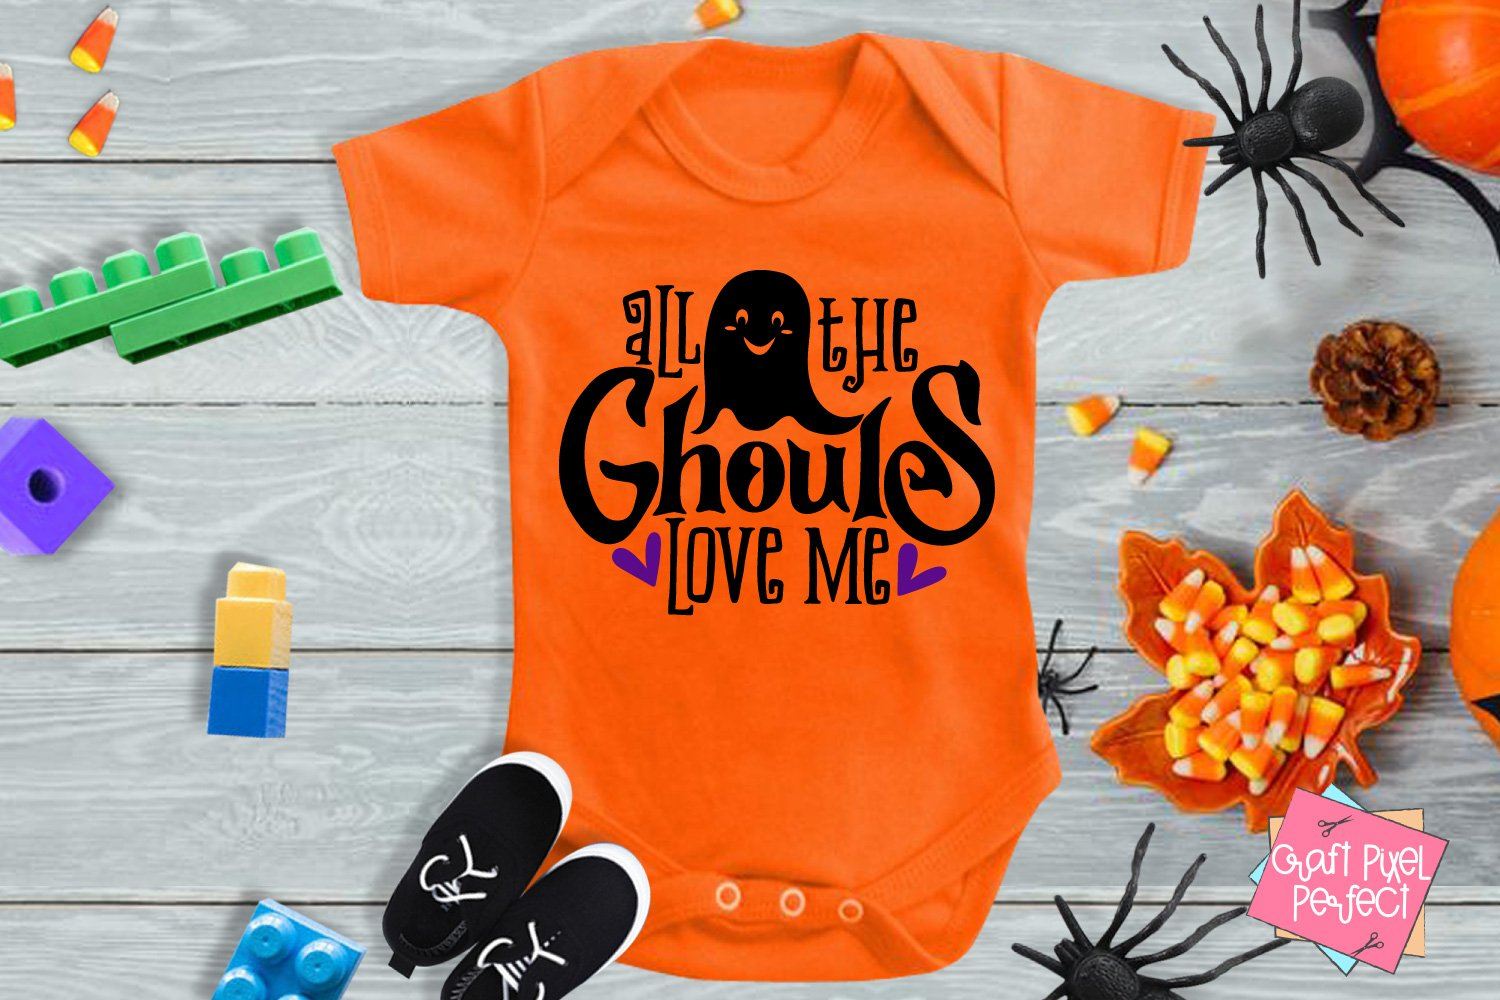 Download All The Ghouls Love Me Baby Ghoul Svg Baby Ghost Svg Halloween Svg Spooky Svg Cute Halloween Svg Halloween Saying Svg Baby Halloween Svg Funny Halloween Svg So Fontsy